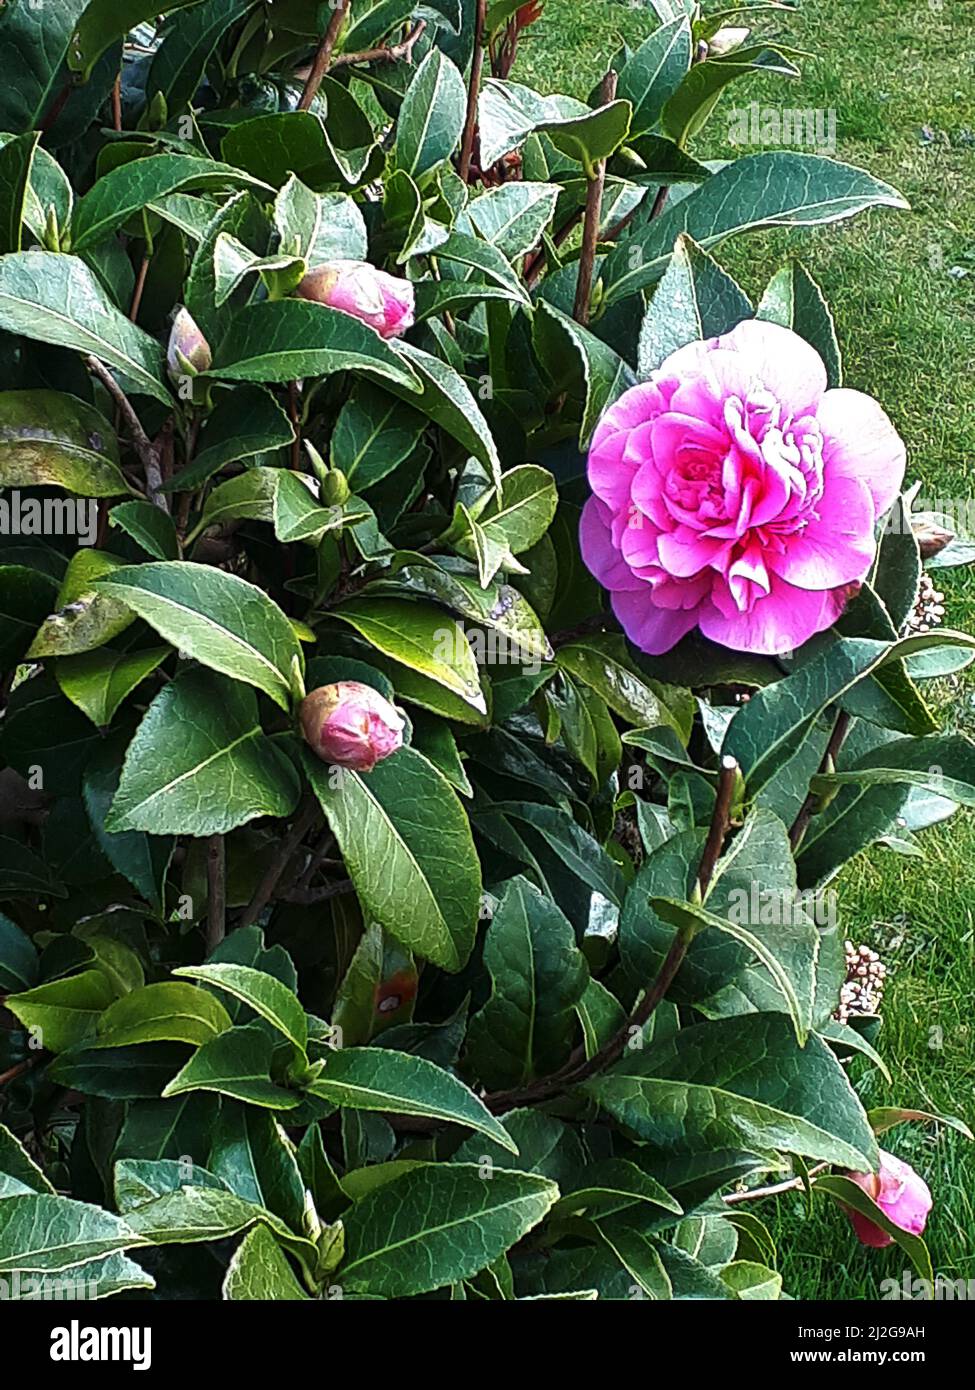 One of the early showy flowers of Spring in Burnley Northern England is the Camellia Japonica or Japanese Rose.It is the state flower of Alabama USA Stock Photo